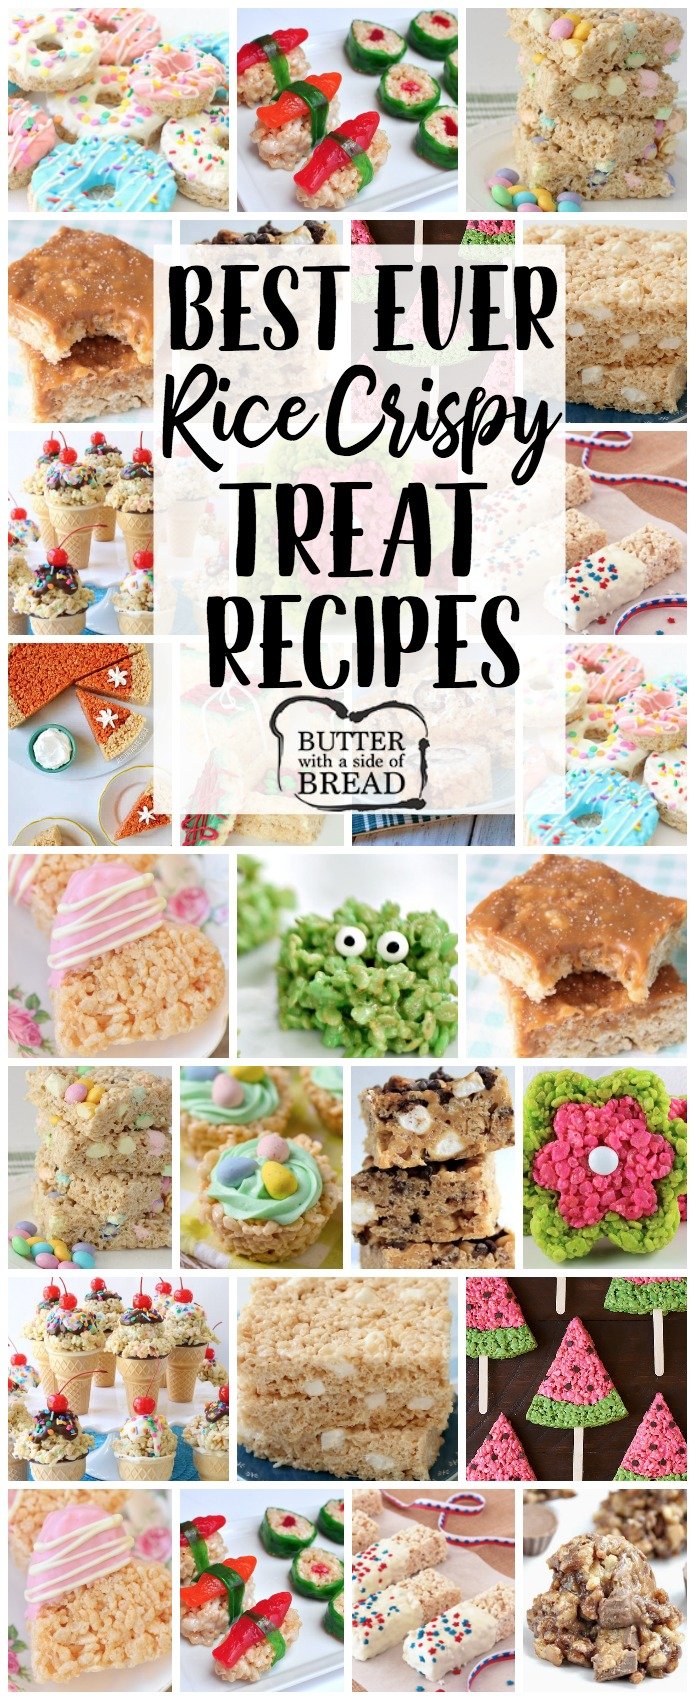 Rice Crispy Treat recipes for any and all occasions! From salted caramel to churro and everything in between, you're sure to find a rice crispy treat recipe you'll love. Our basic recipe for Krispie Treats is THE BEST! #ricekrispie #ricecrispy #krispies #dessert #food #treat #marshmallow